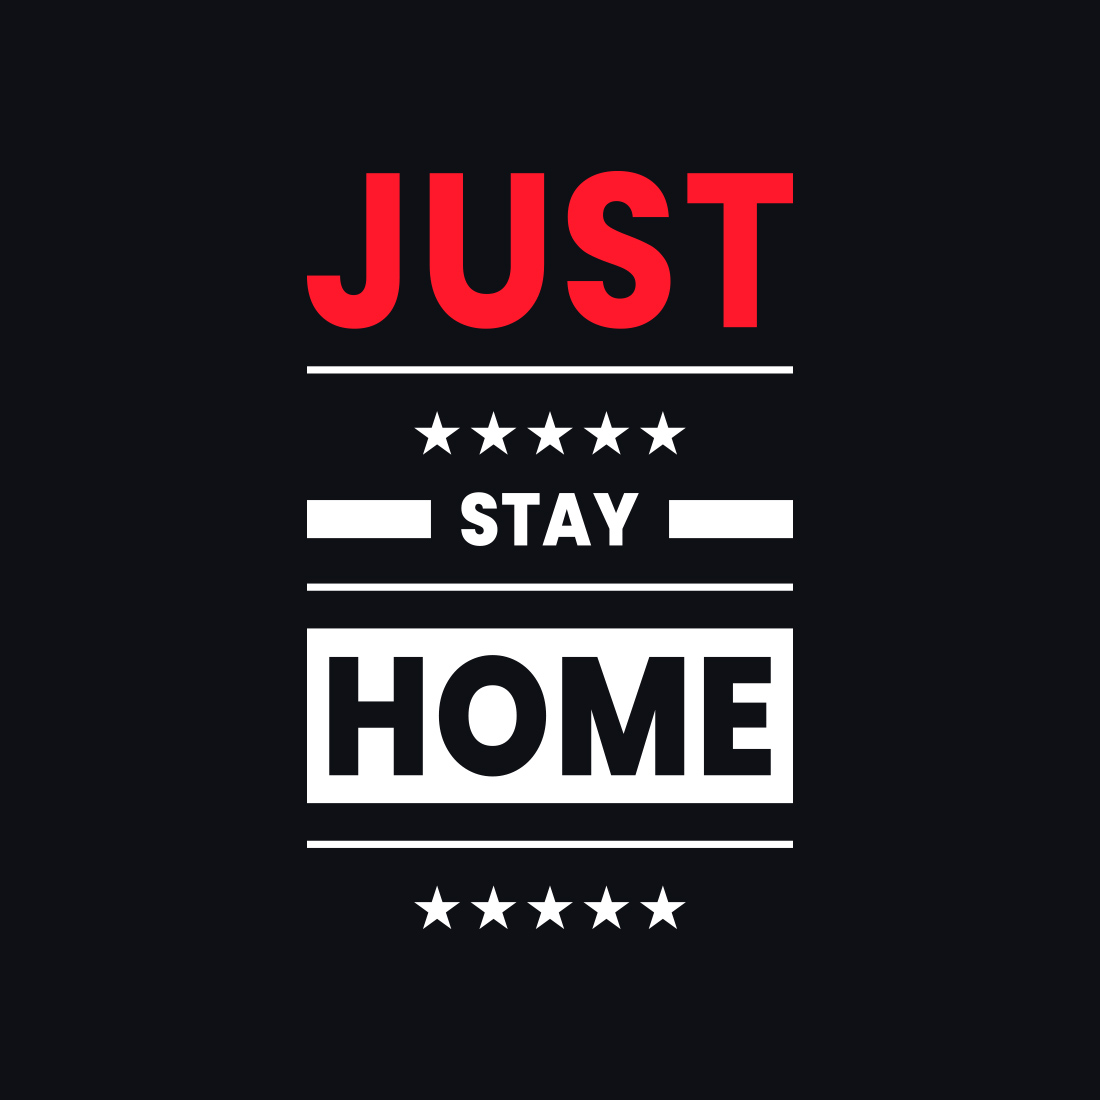 Just Stay Home Typography T-Shirt Design presentation.